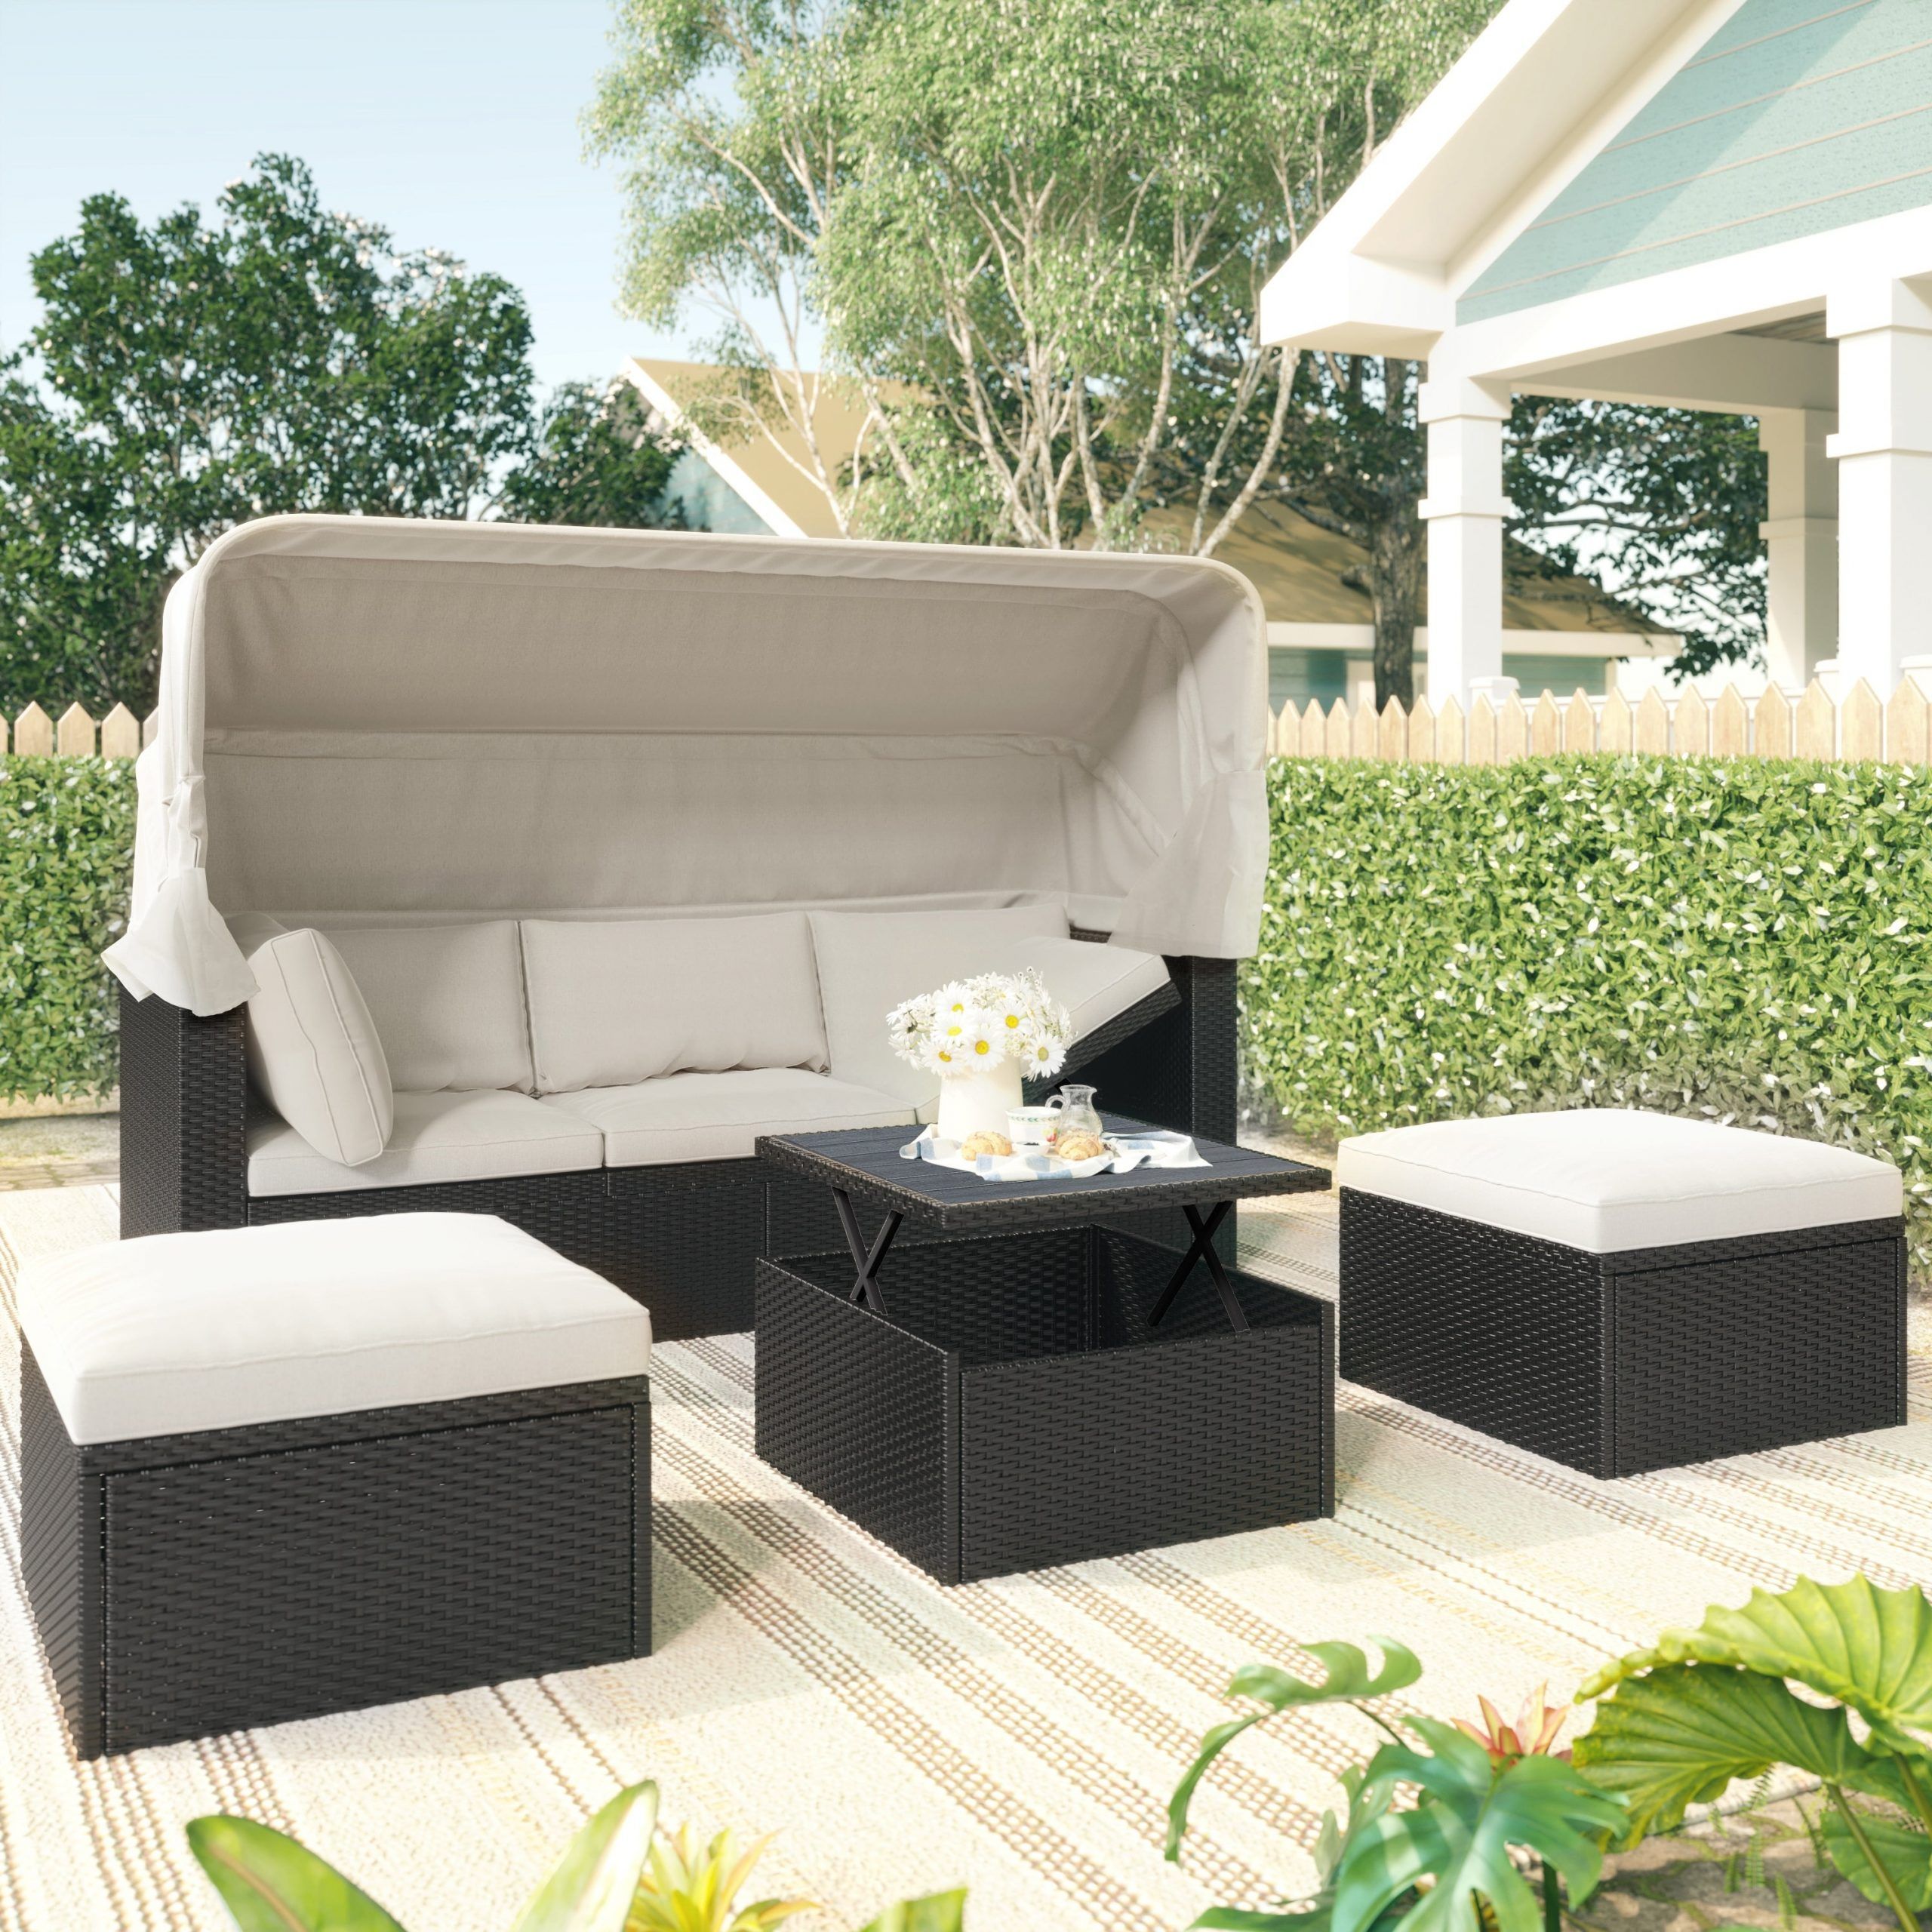 2019 4pcs Outdoor Rattan Retractable Canopy Daybed Sectional Sofa Set With  Foldable Board, Lift Top Storage Table And 2 Ottomans – Overstock – 35580507 Within Lift Top Storage Outdoor Tables (View 10 of 15)